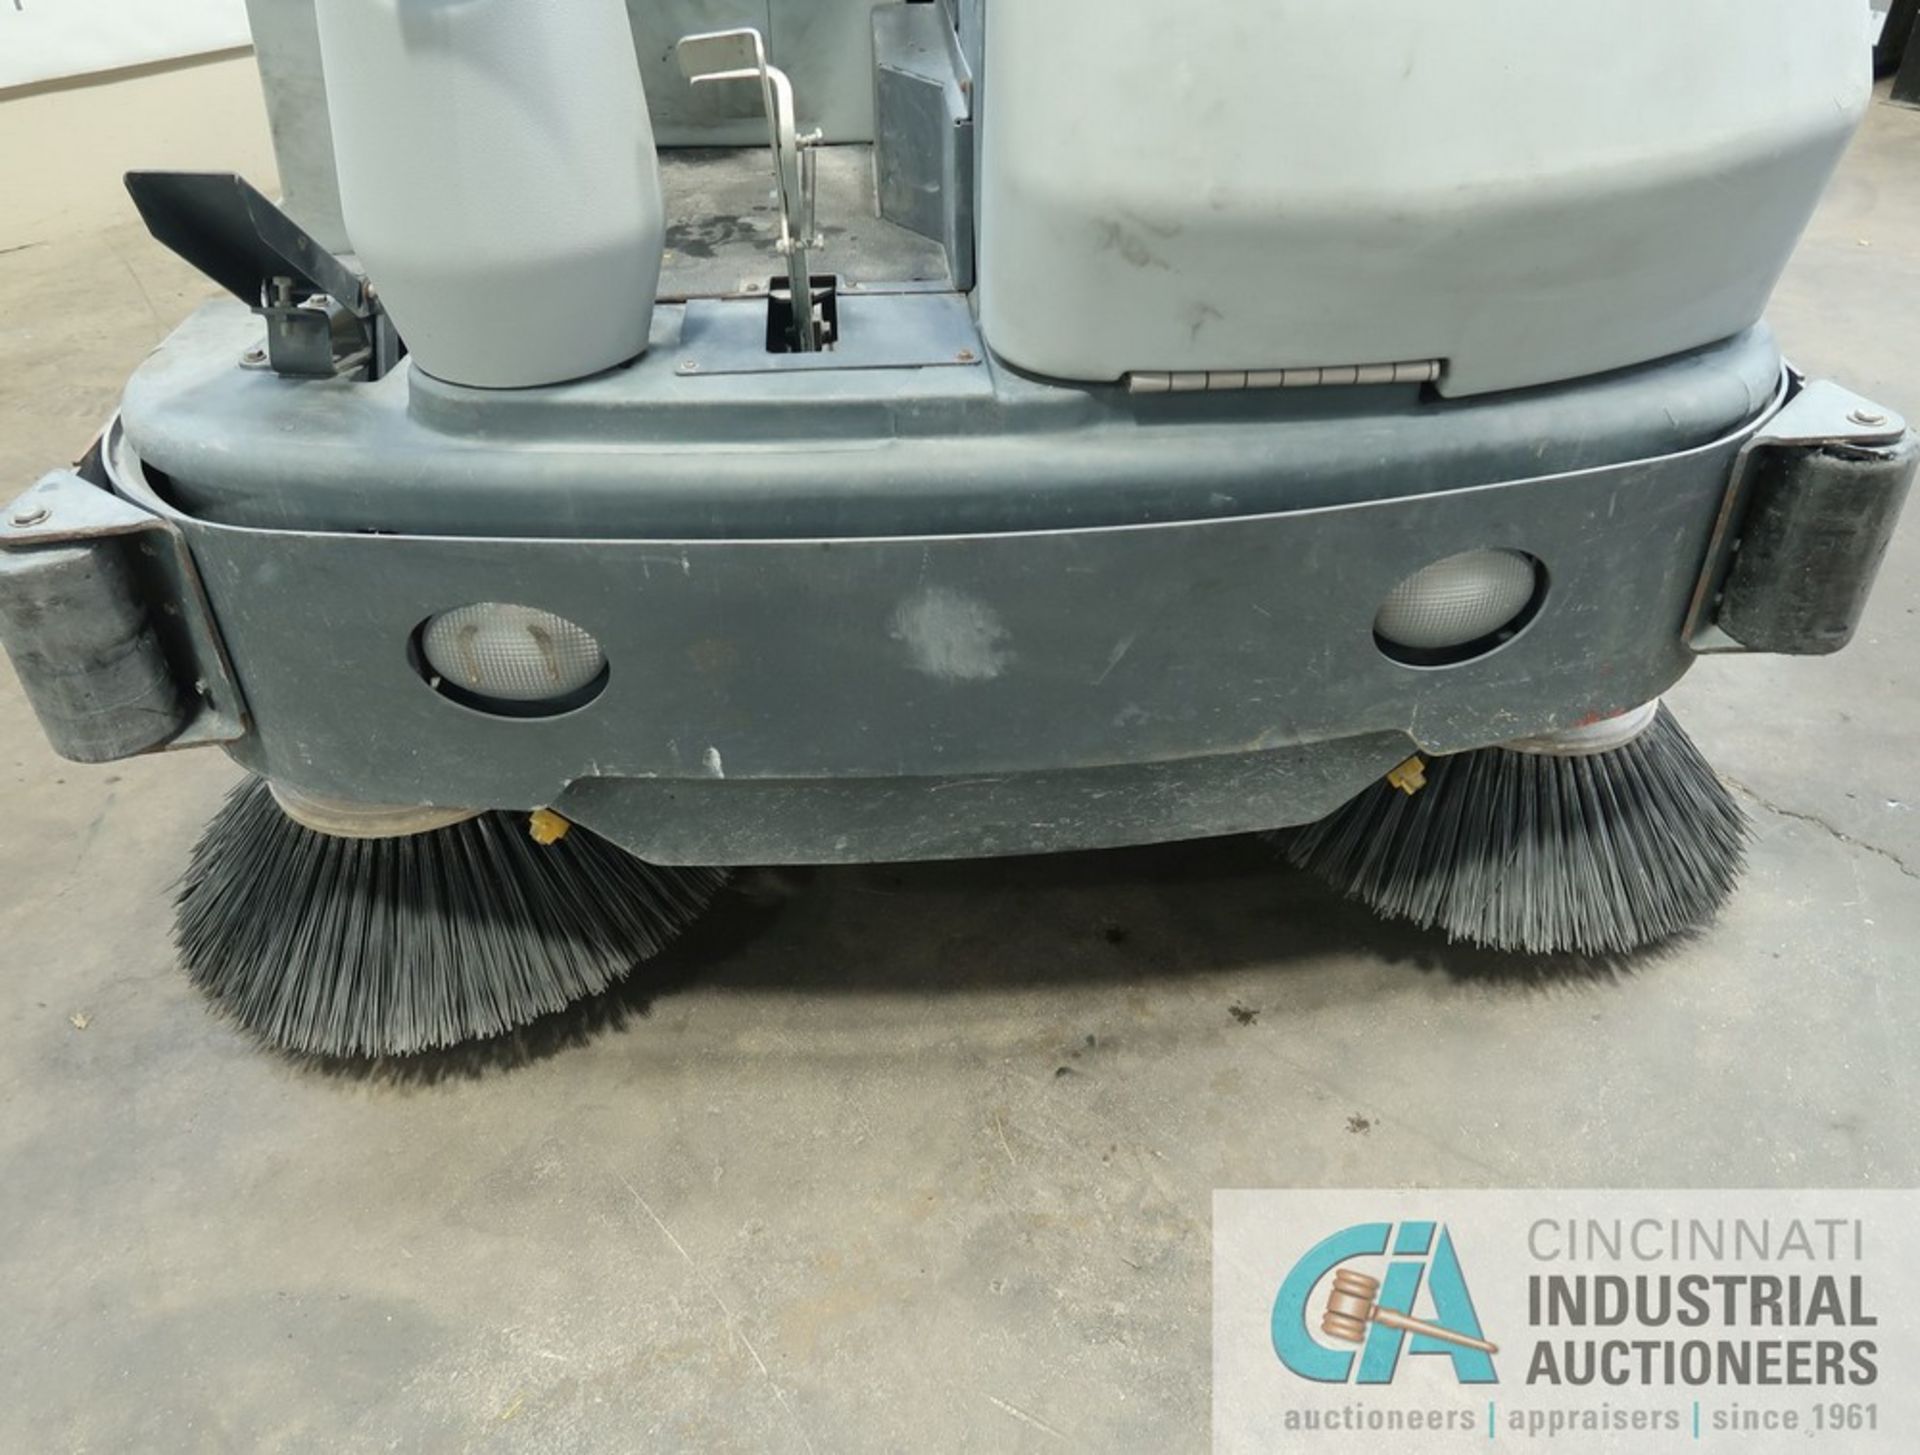 2019 ADVANCE MODEL SC8000 LP GAS FLOOR SCRUBBER; S/N 1000069070, 1,198 HOURS SHOWING - Image 3 of 11